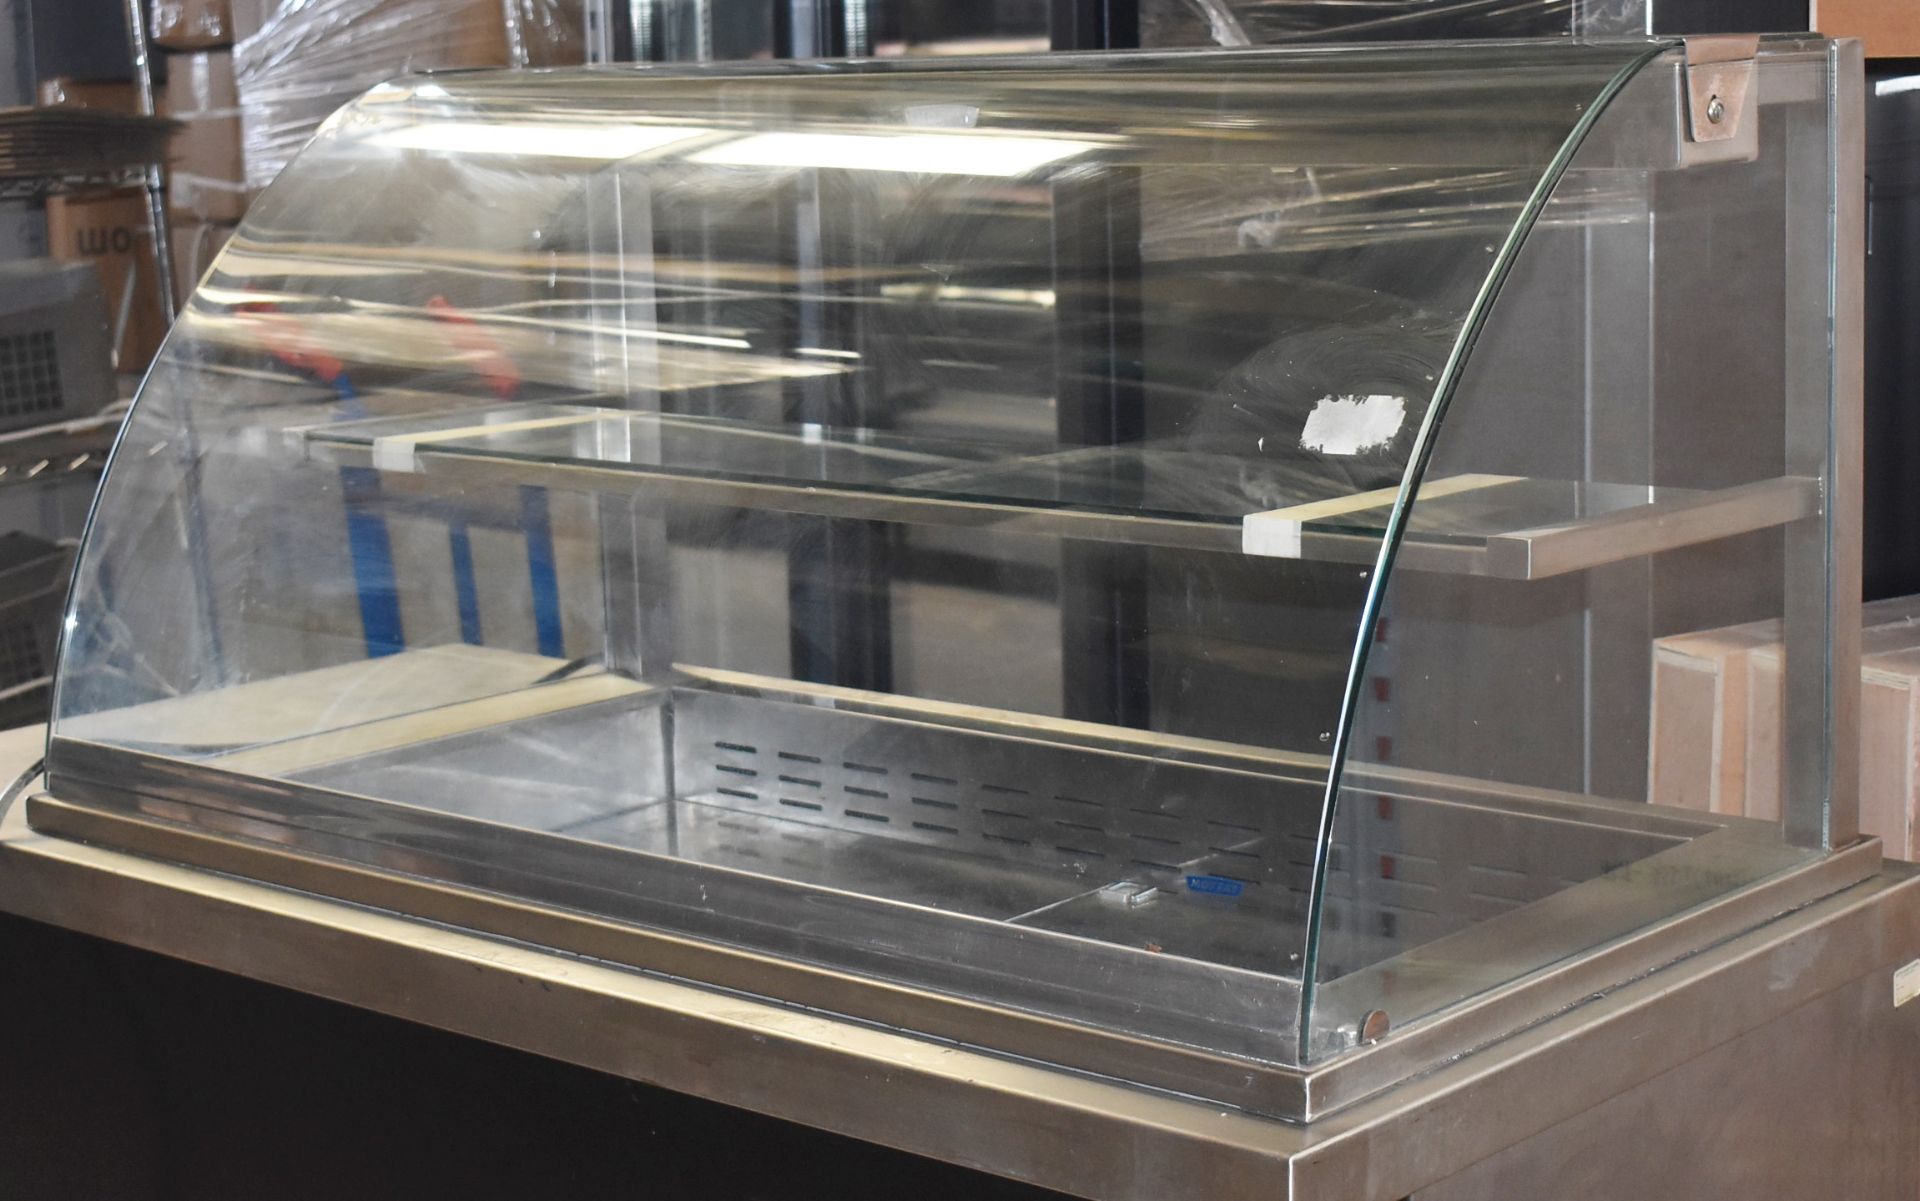 1 x Moffat Refrigerated Display Unit on Castors - Stainless Steel With Glass Display For Cold - Image 12 of 14